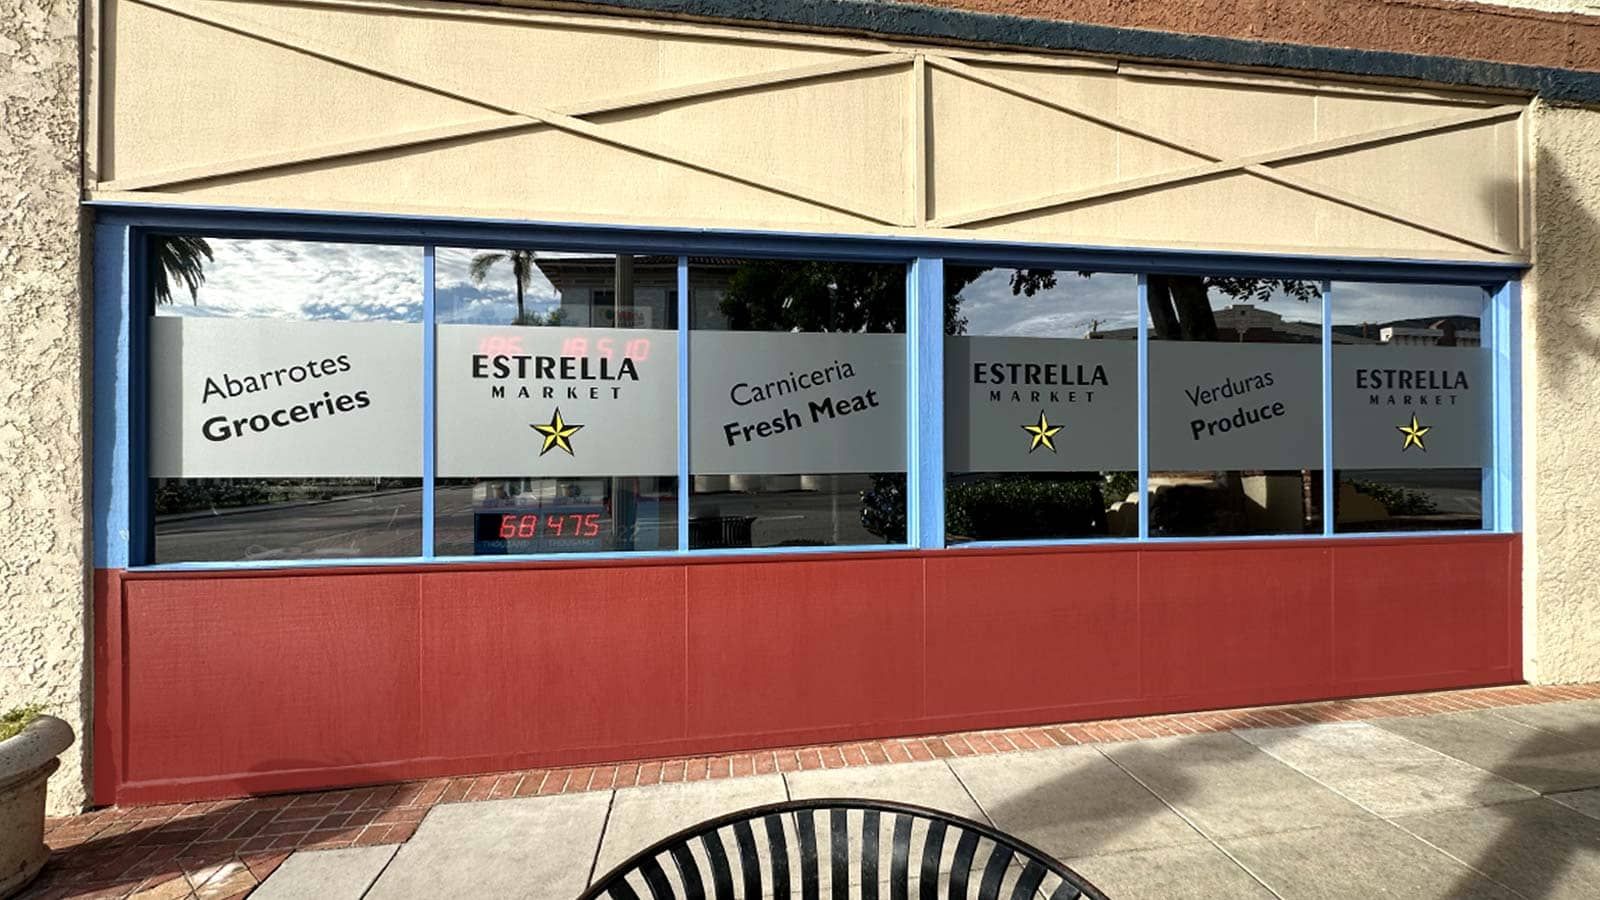 Estrella Market store signs attached to the window glass